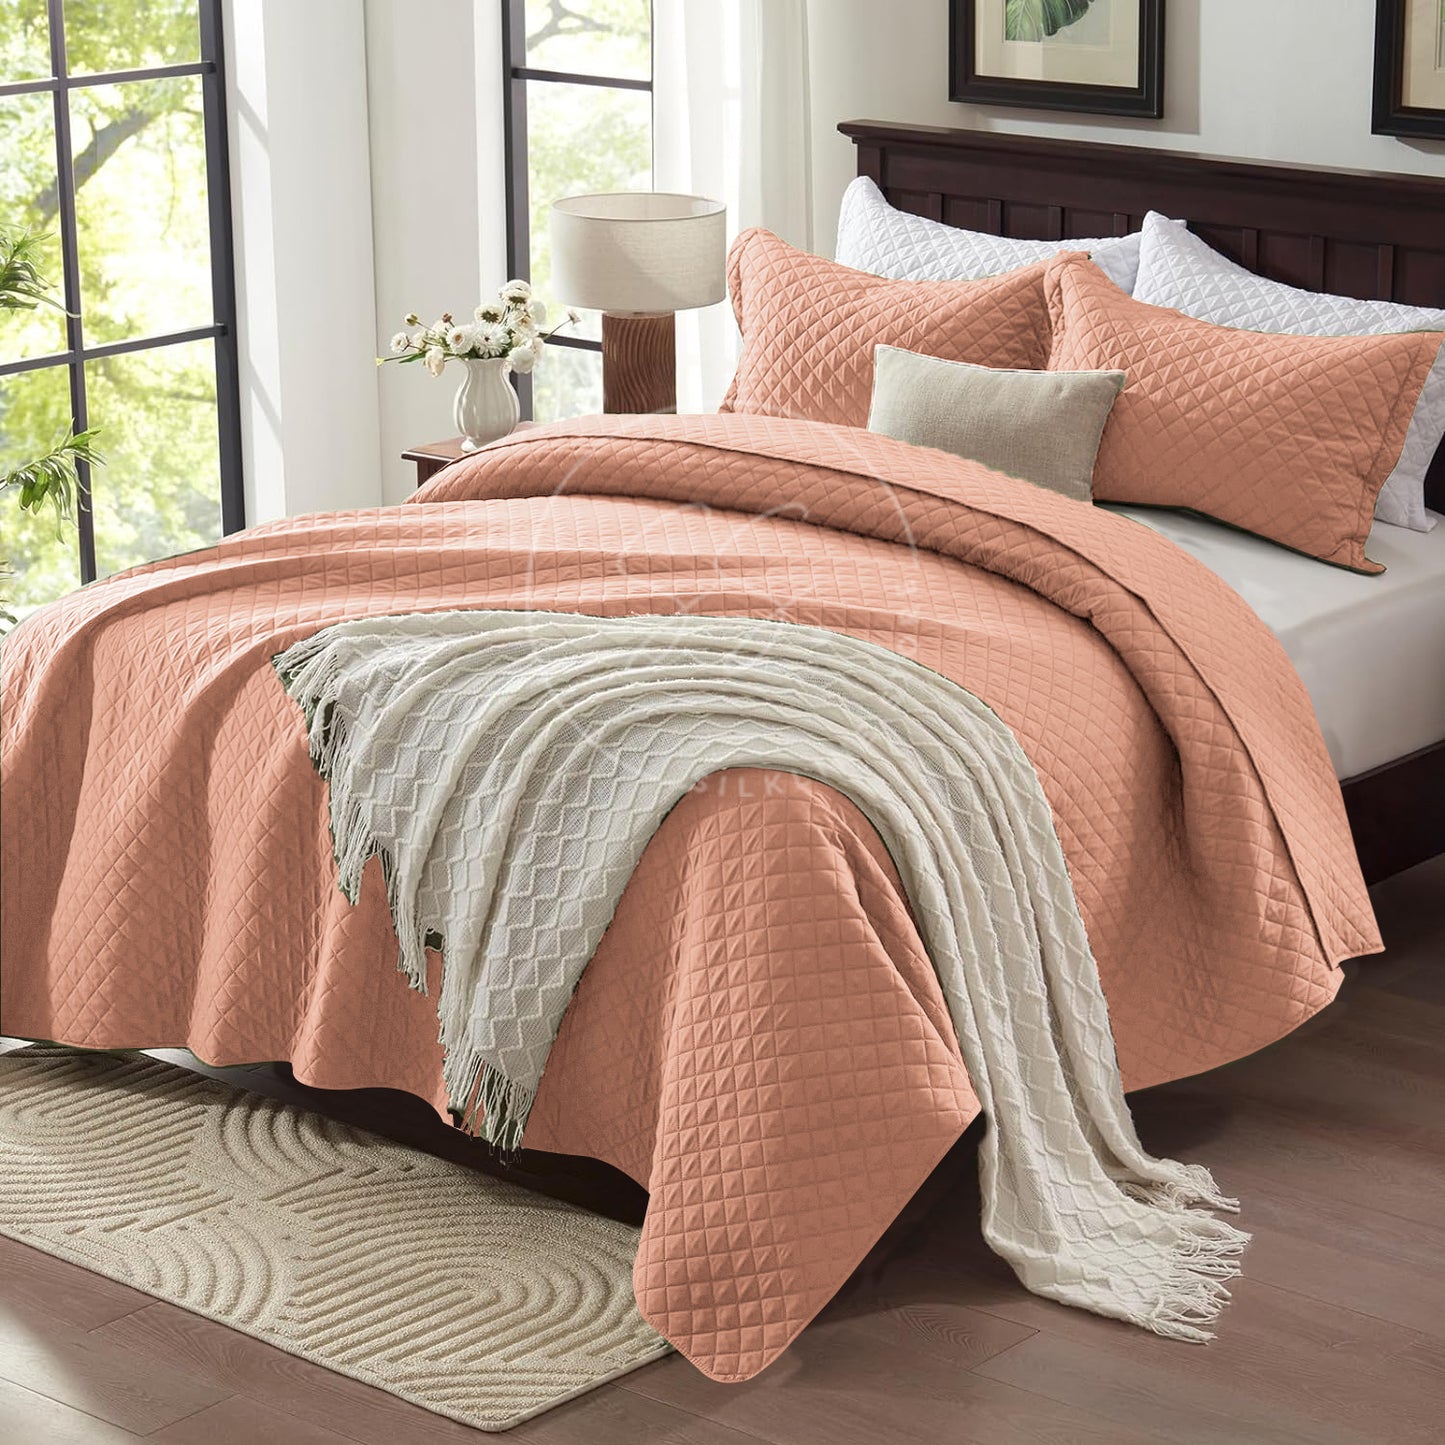 Peach - king Size Microfibre: Quilted 3 pcs bedspread set